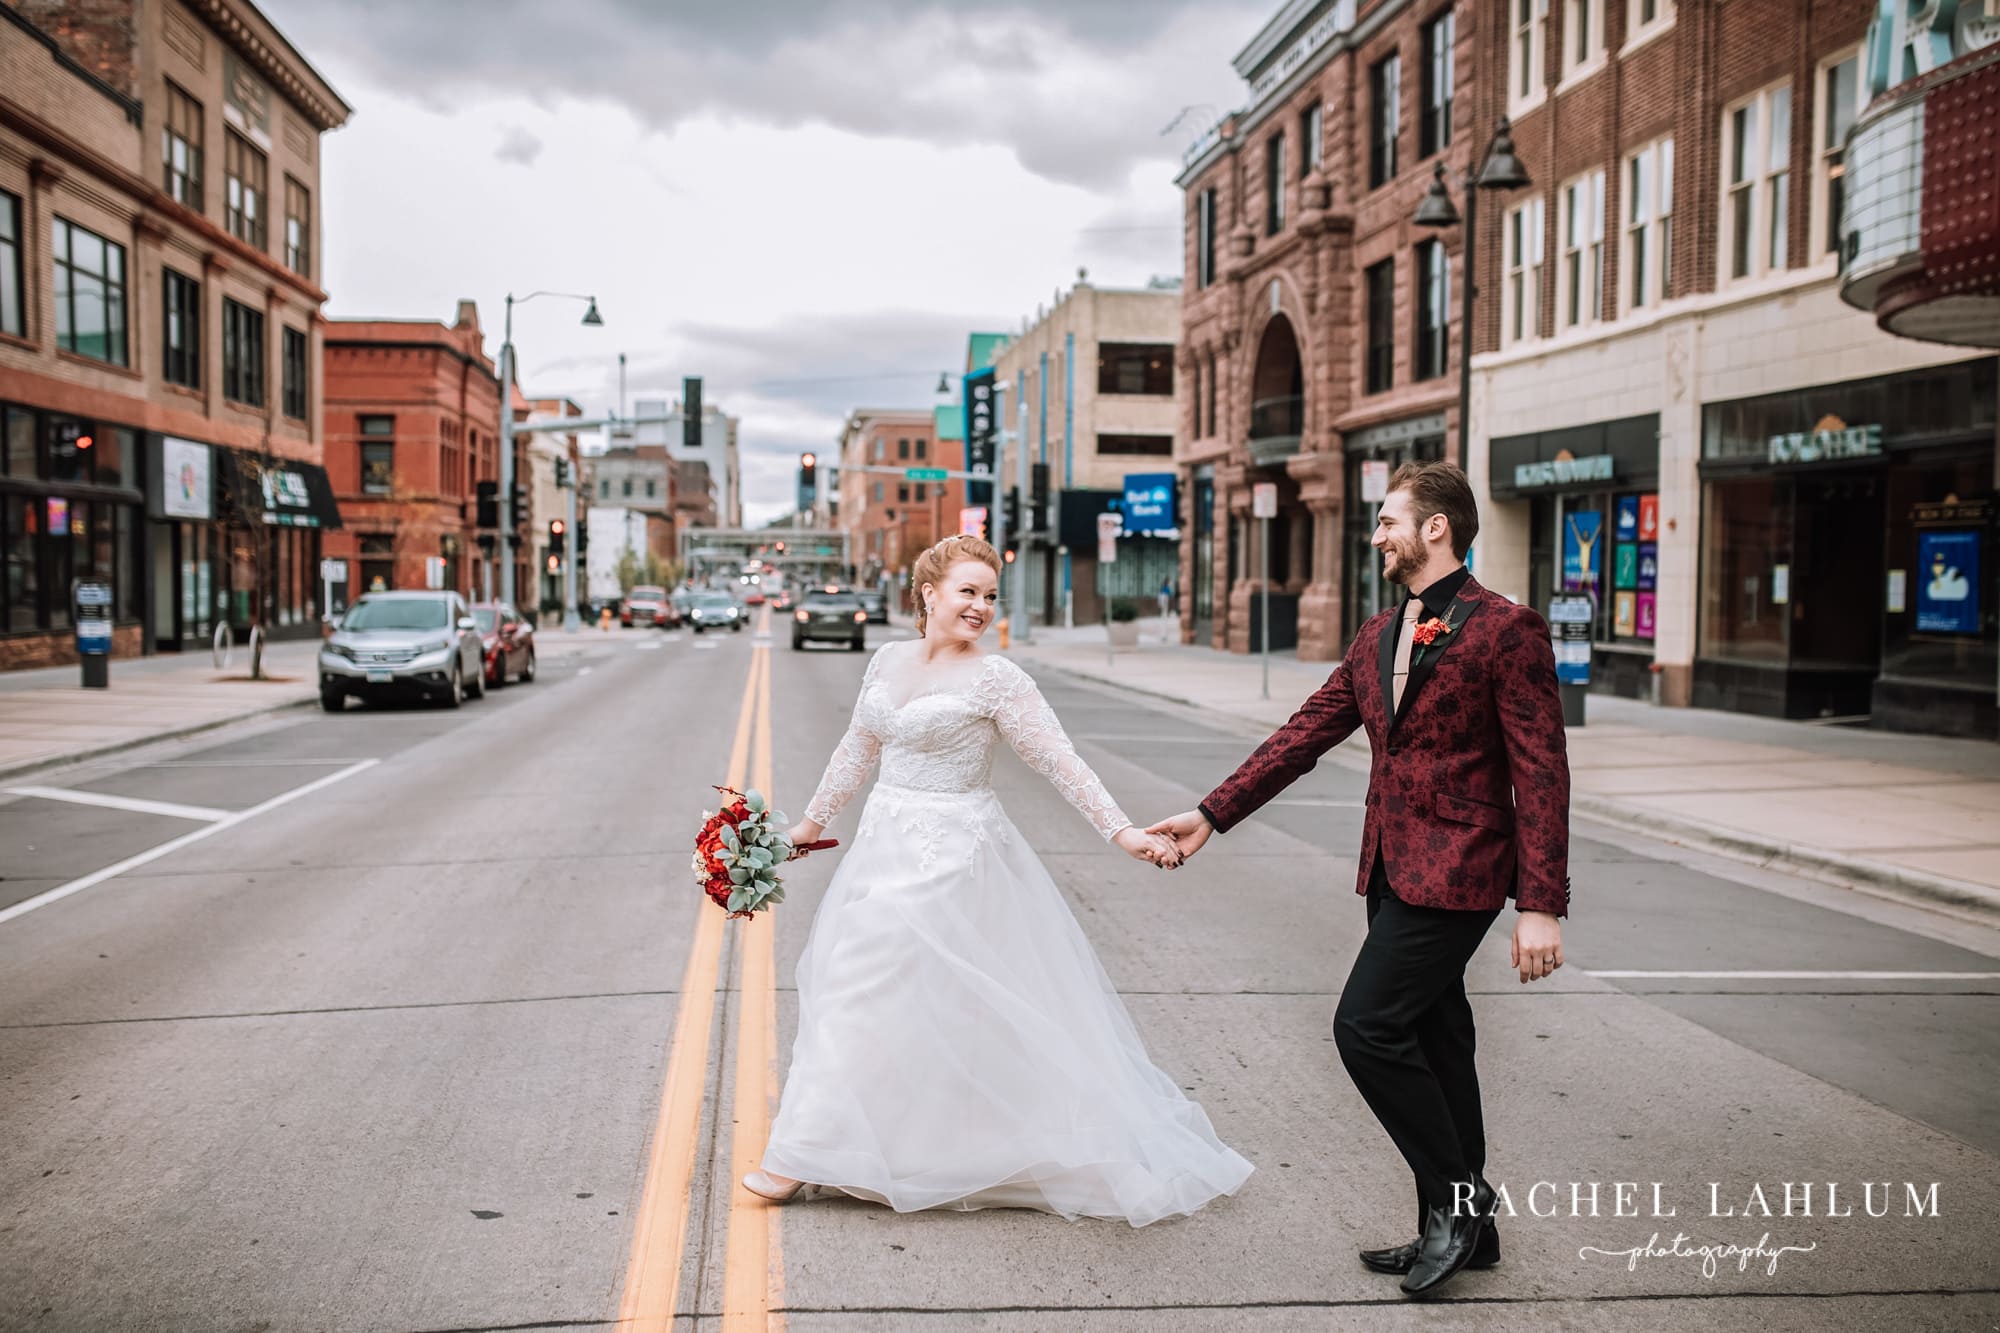 Bride looks back at groom as they cross a street in Duluth, Minnesota.